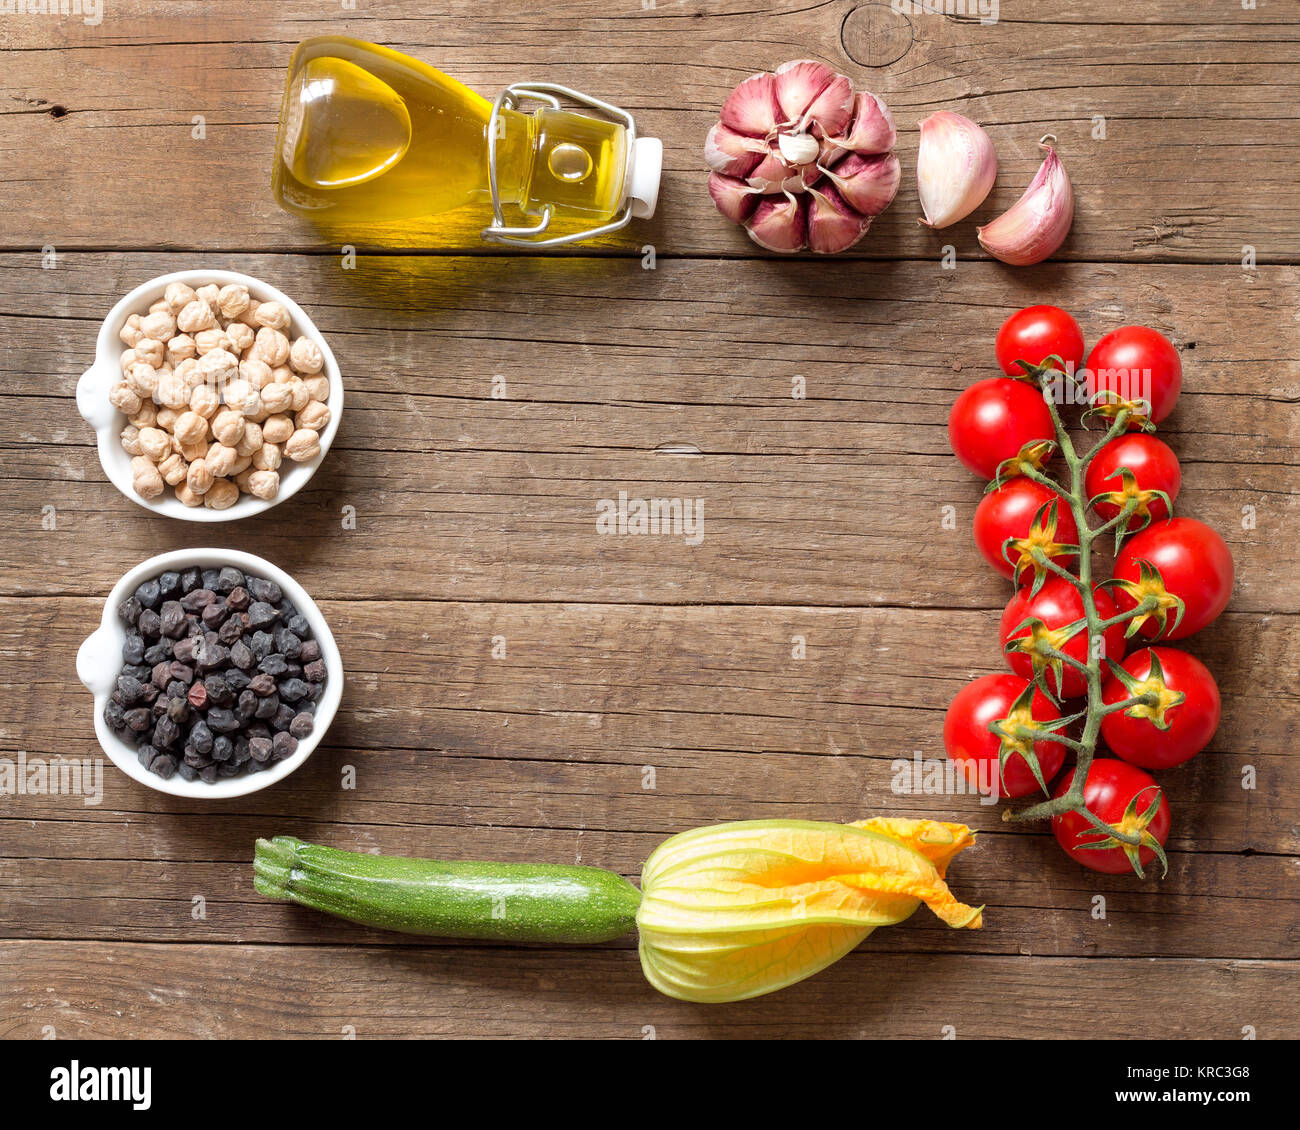 Vegetables and chickpea on a wooden table Stock Photo